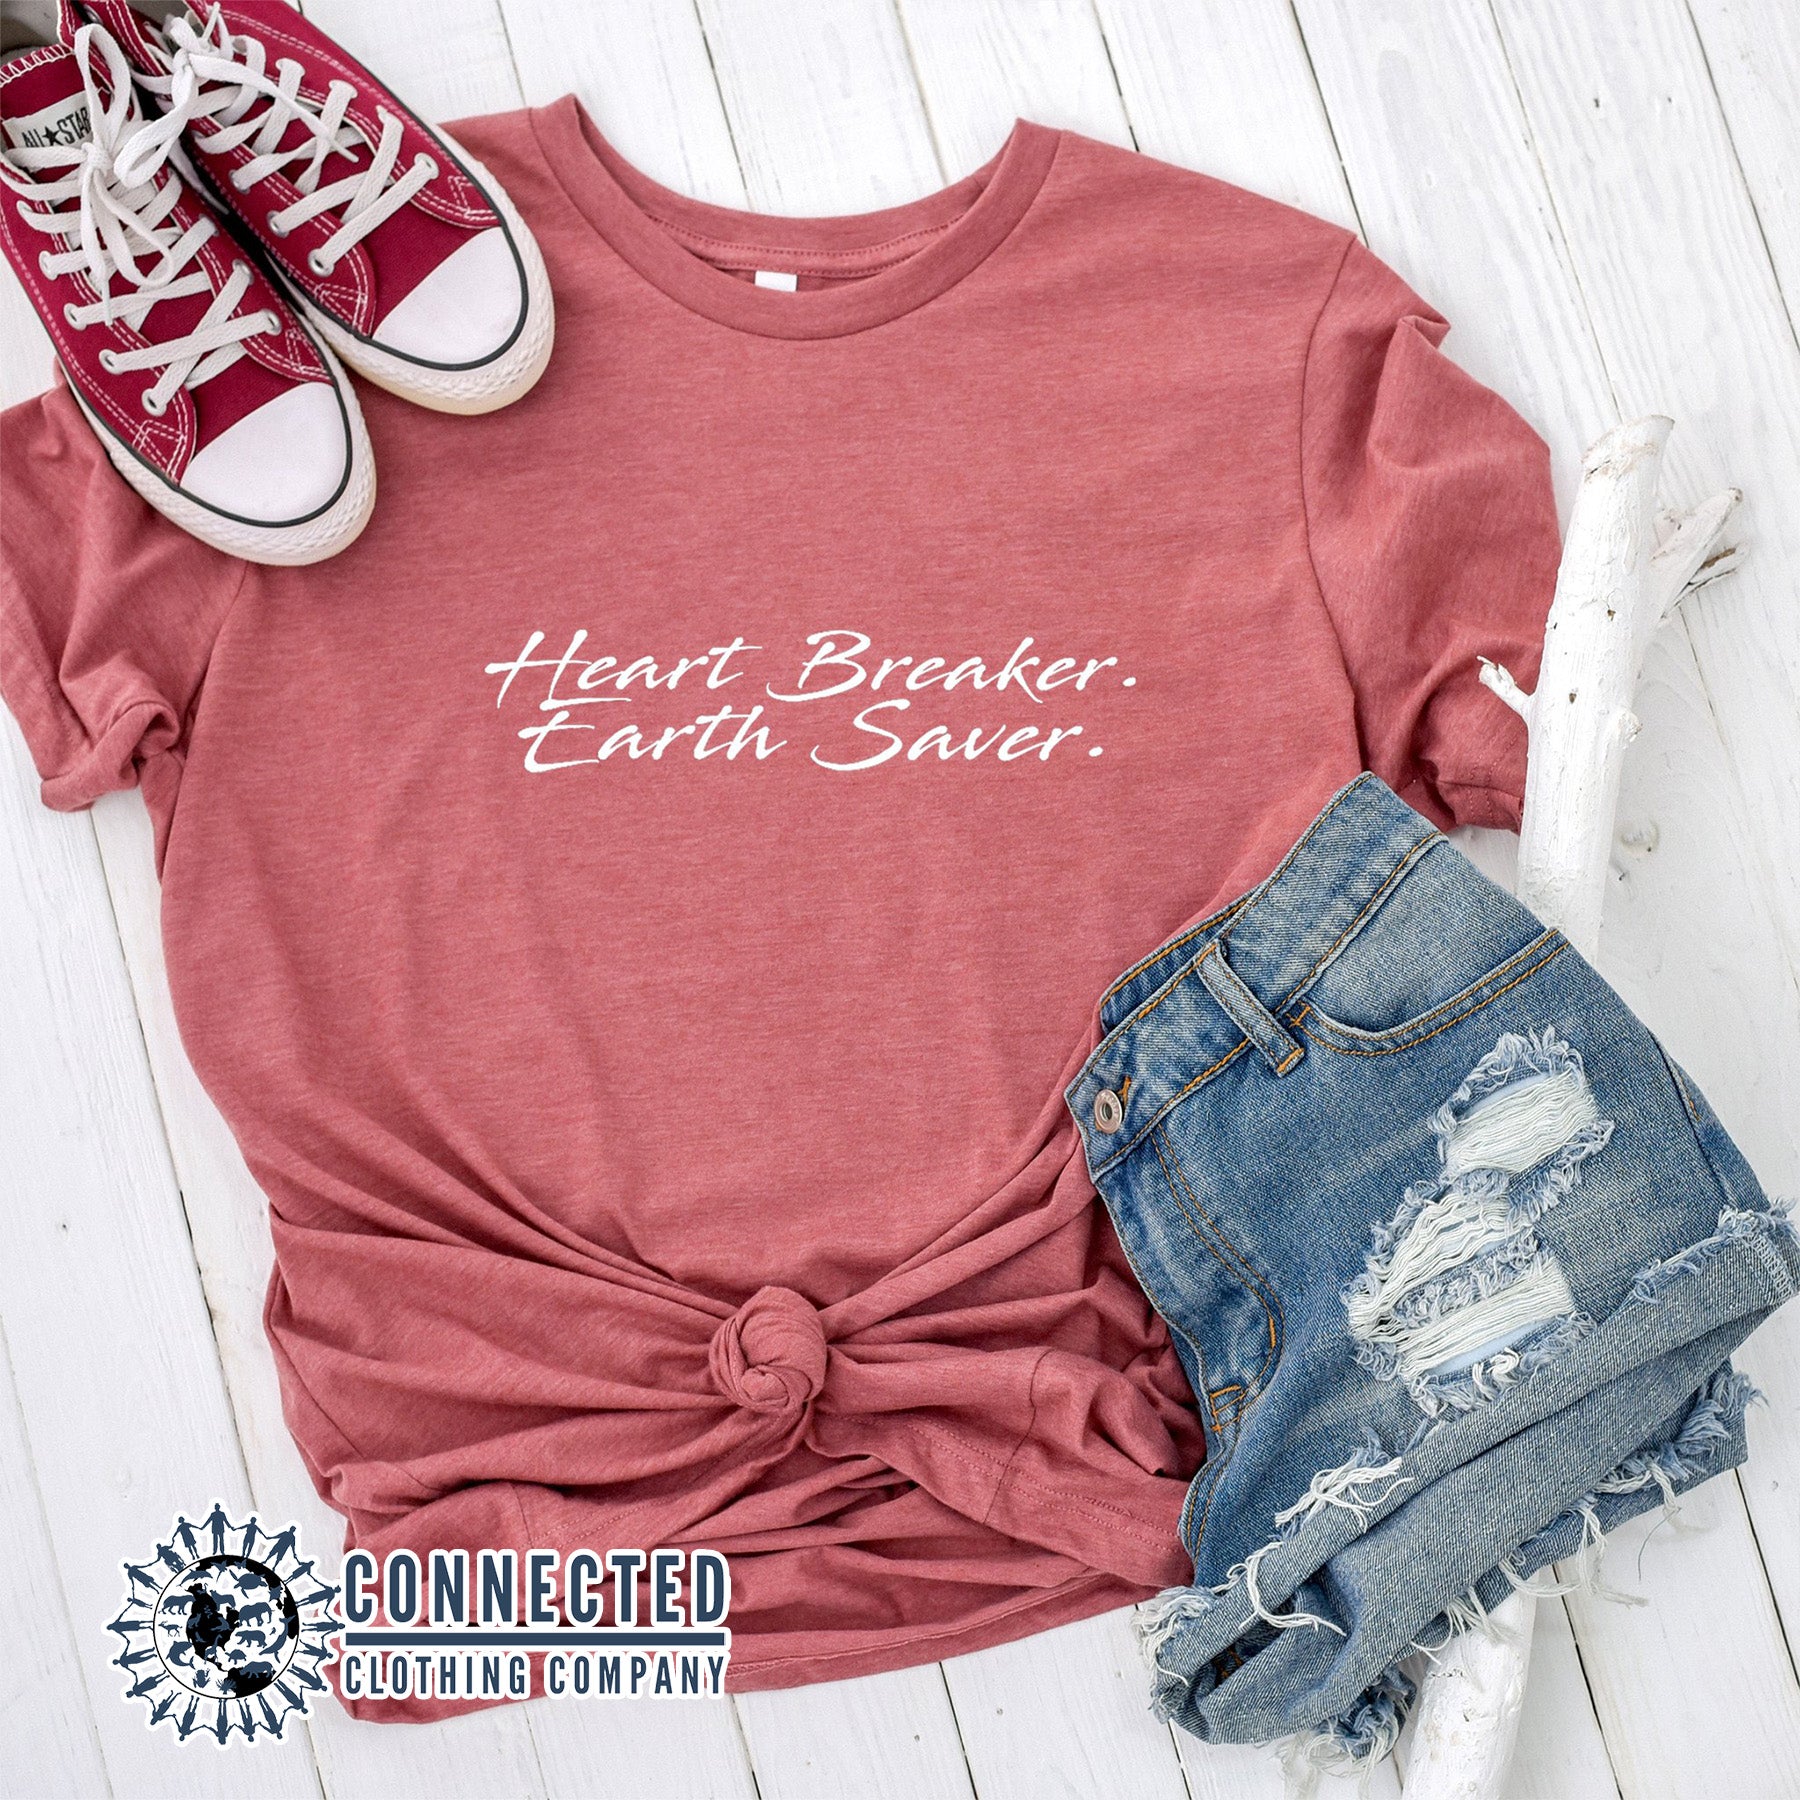 Mauve Heart Breaker. Earth Saver. Short-Sleeve Tee - sweetsherriloudesigns - Ethically and Sustainably Made - 10% of profits donated to ocean conservation